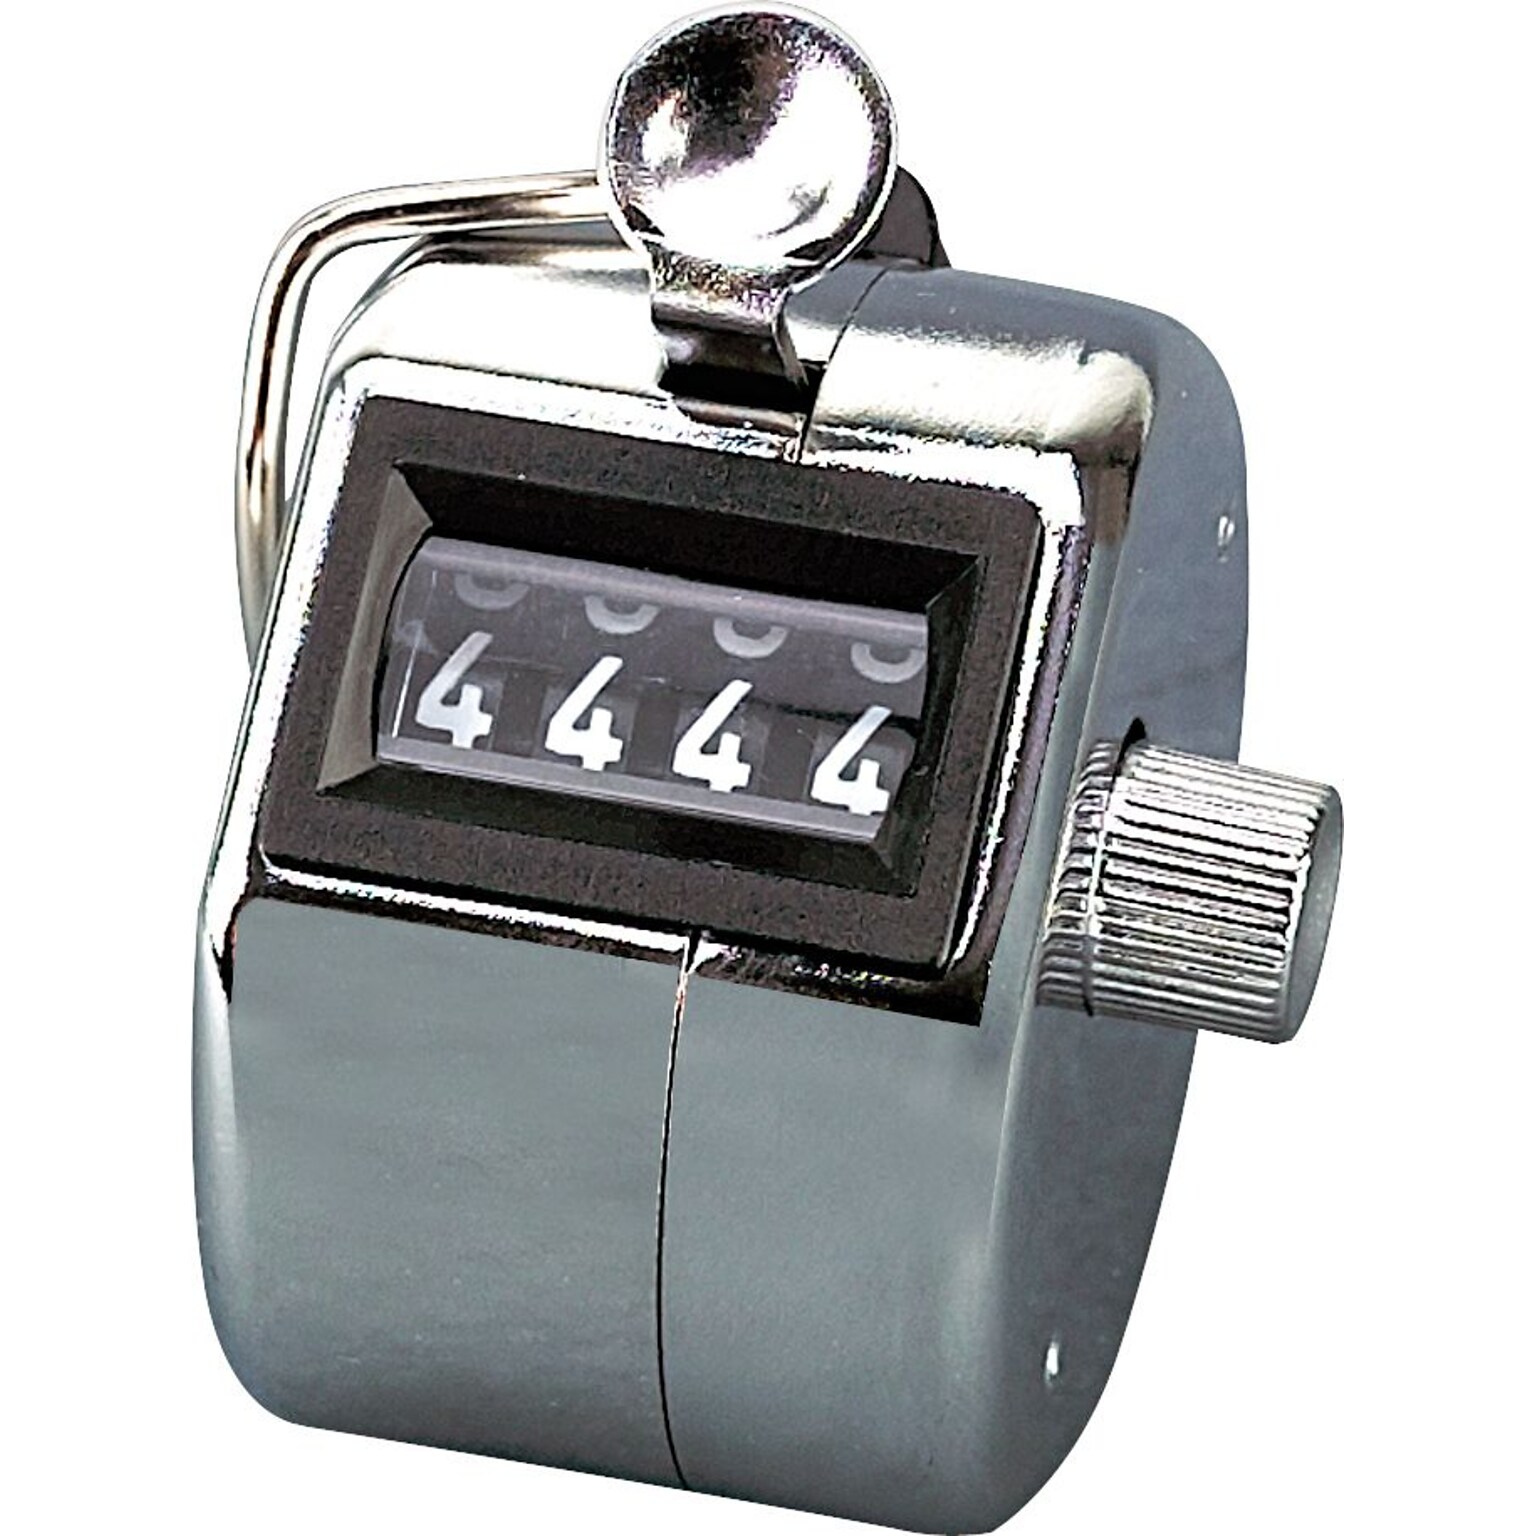 Tally i hand model tally counter, registers 0-9999, chrome